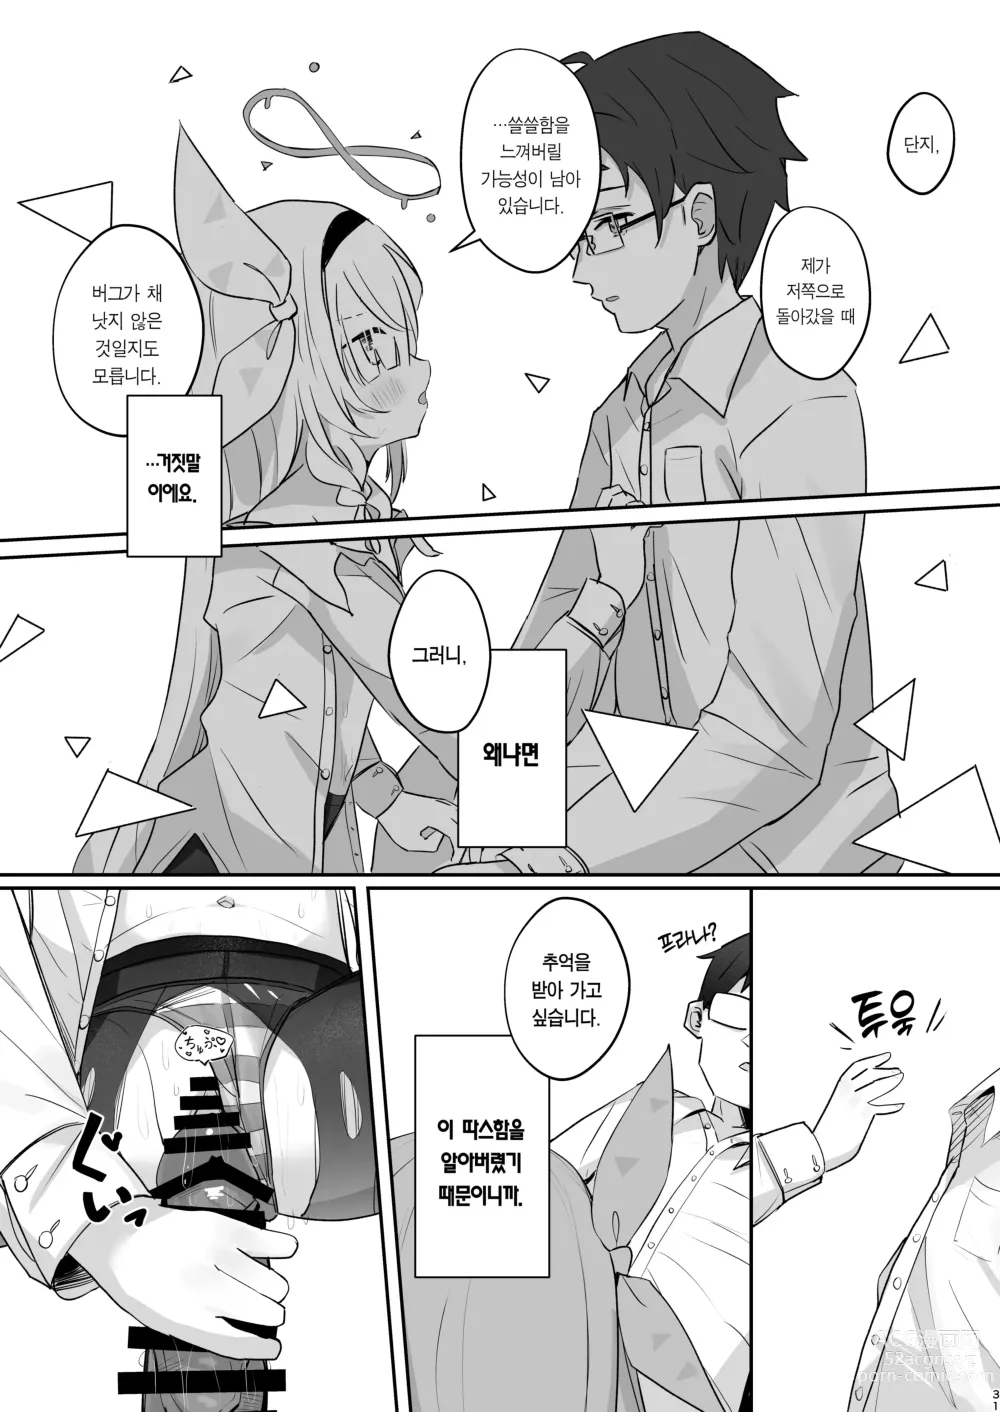 Page 30 of doujinshi 이 따스함을 알아버렸어